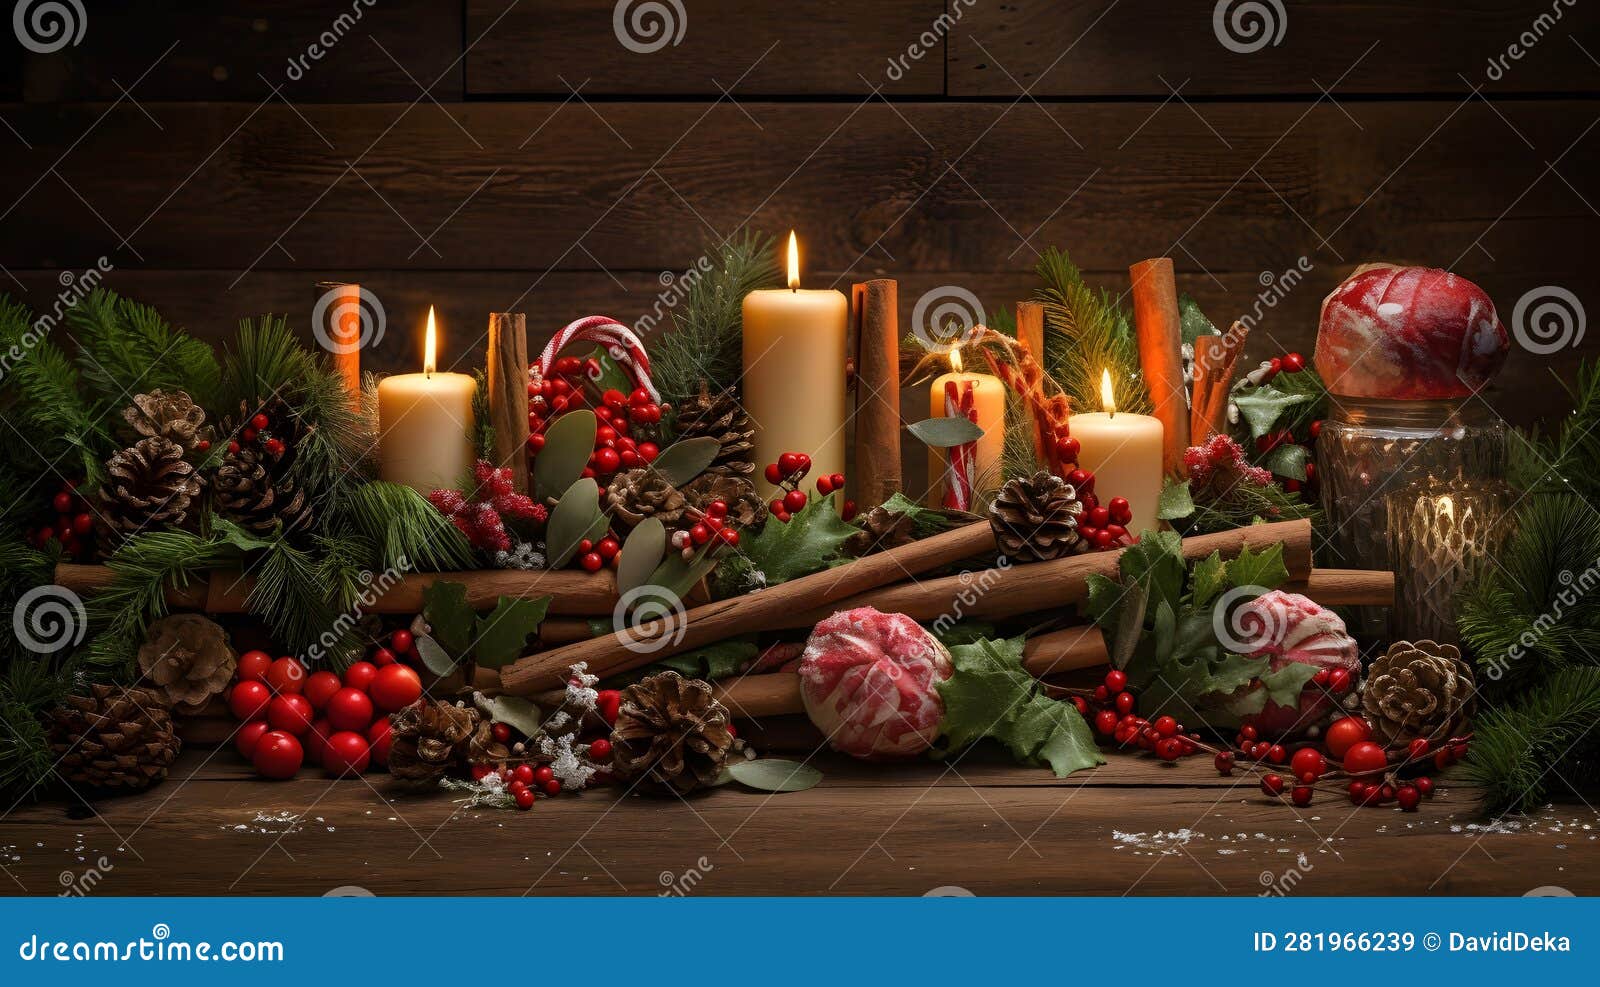 enchanting christmas candle bouquet in spectacular backdrops - organic and naturalistic compositions